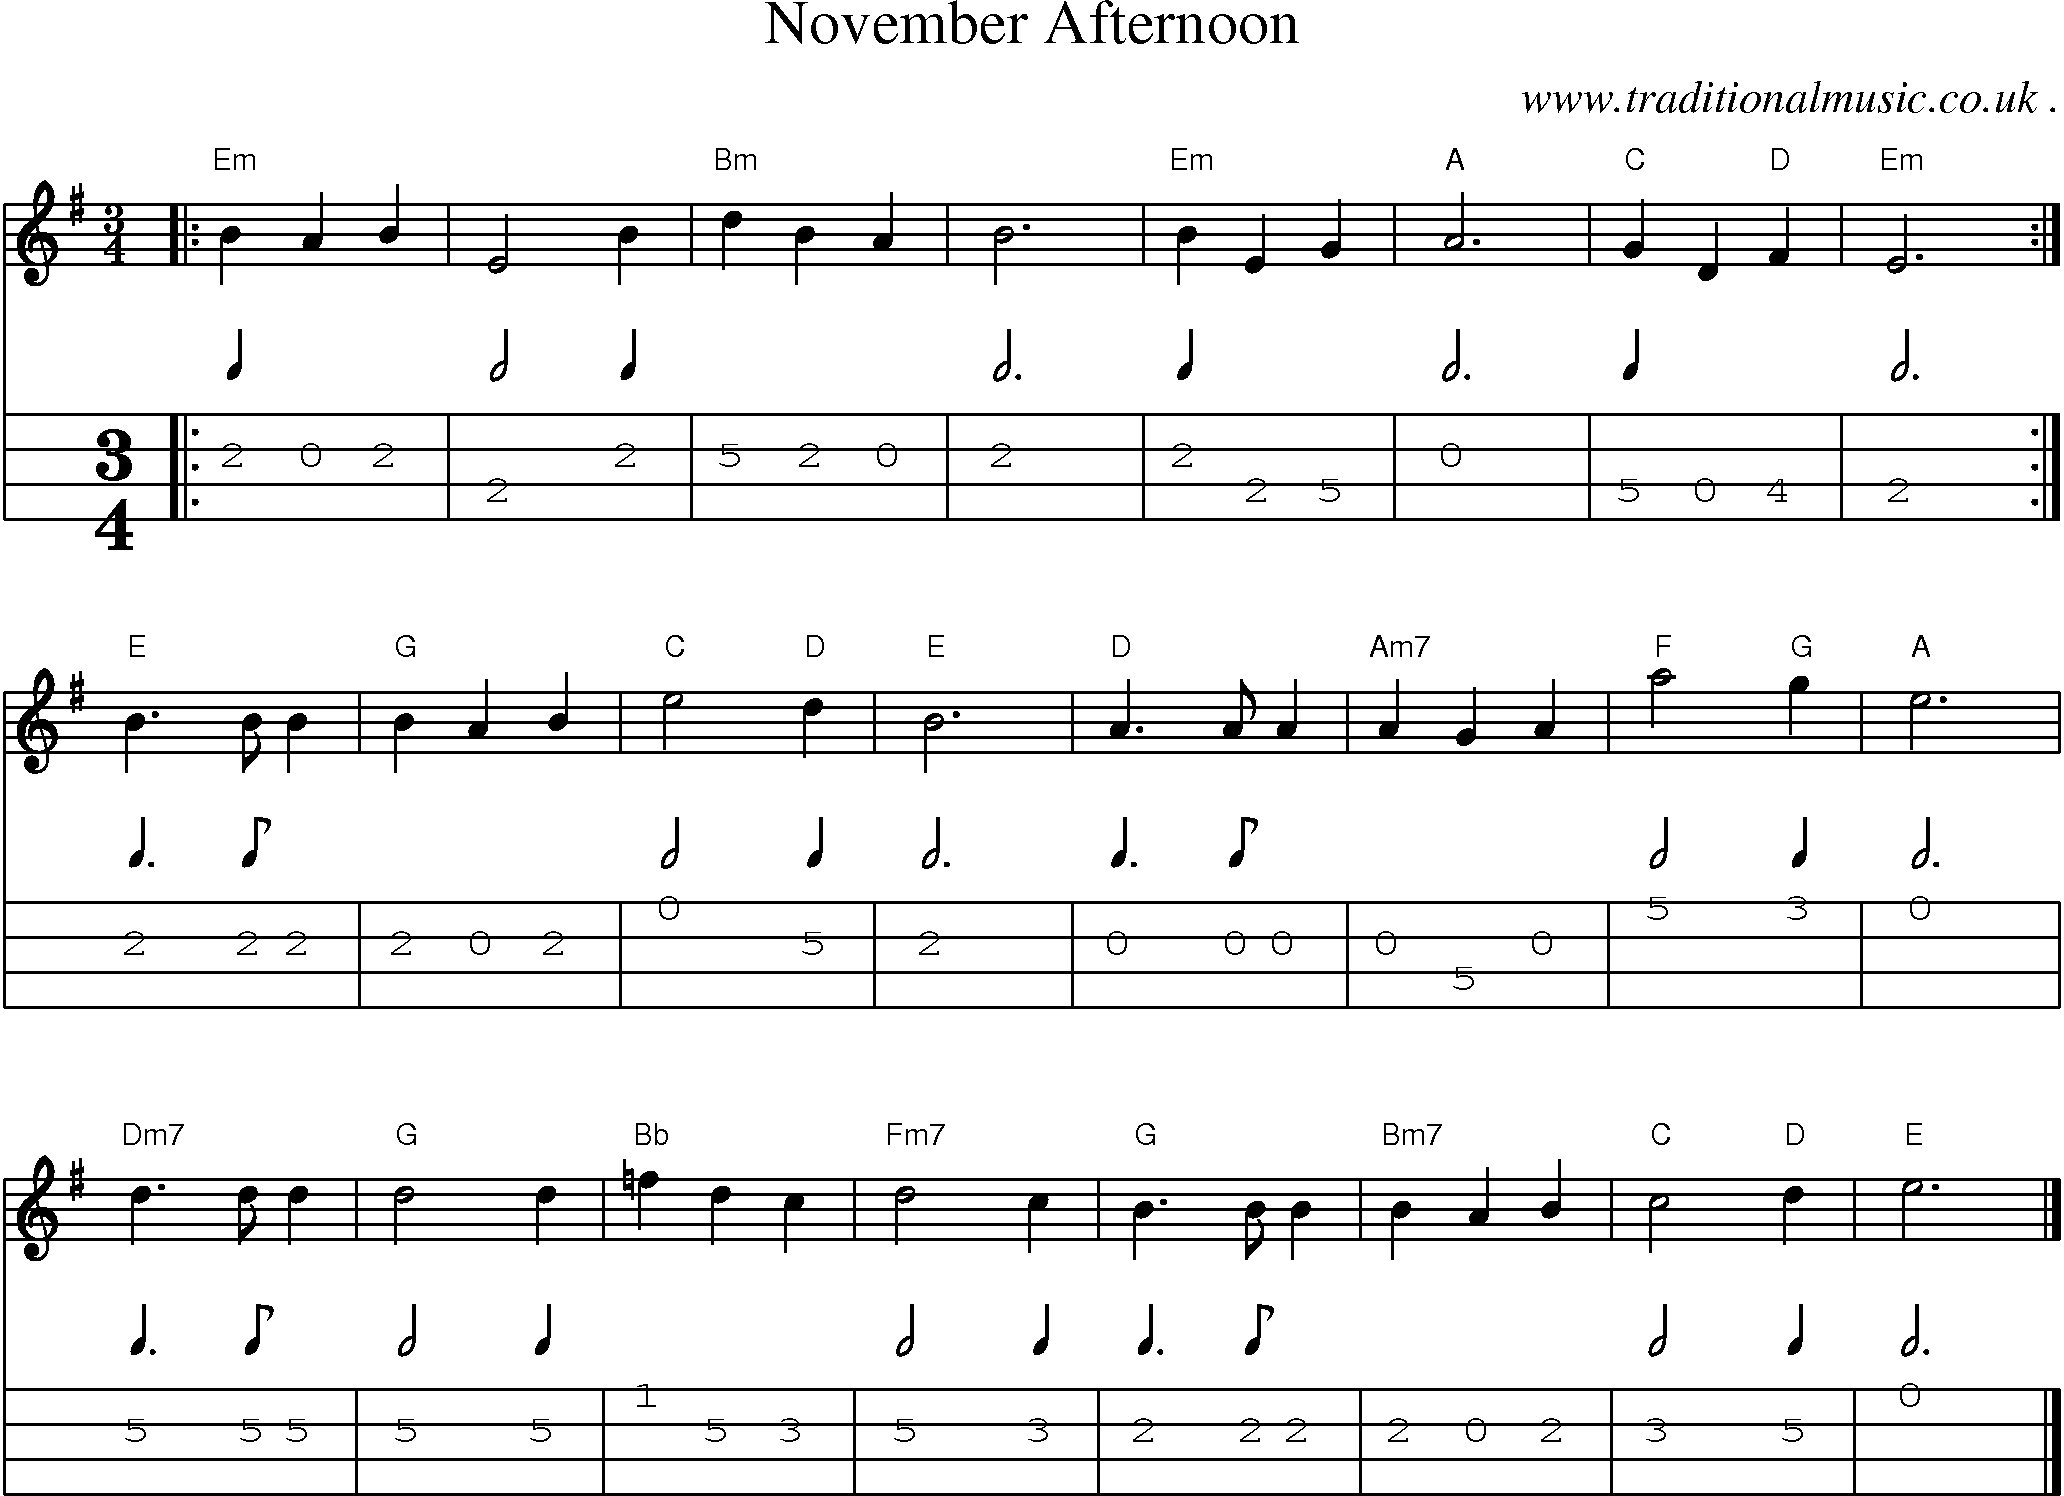 Music Score and Guitar Tabs for November Afternoon